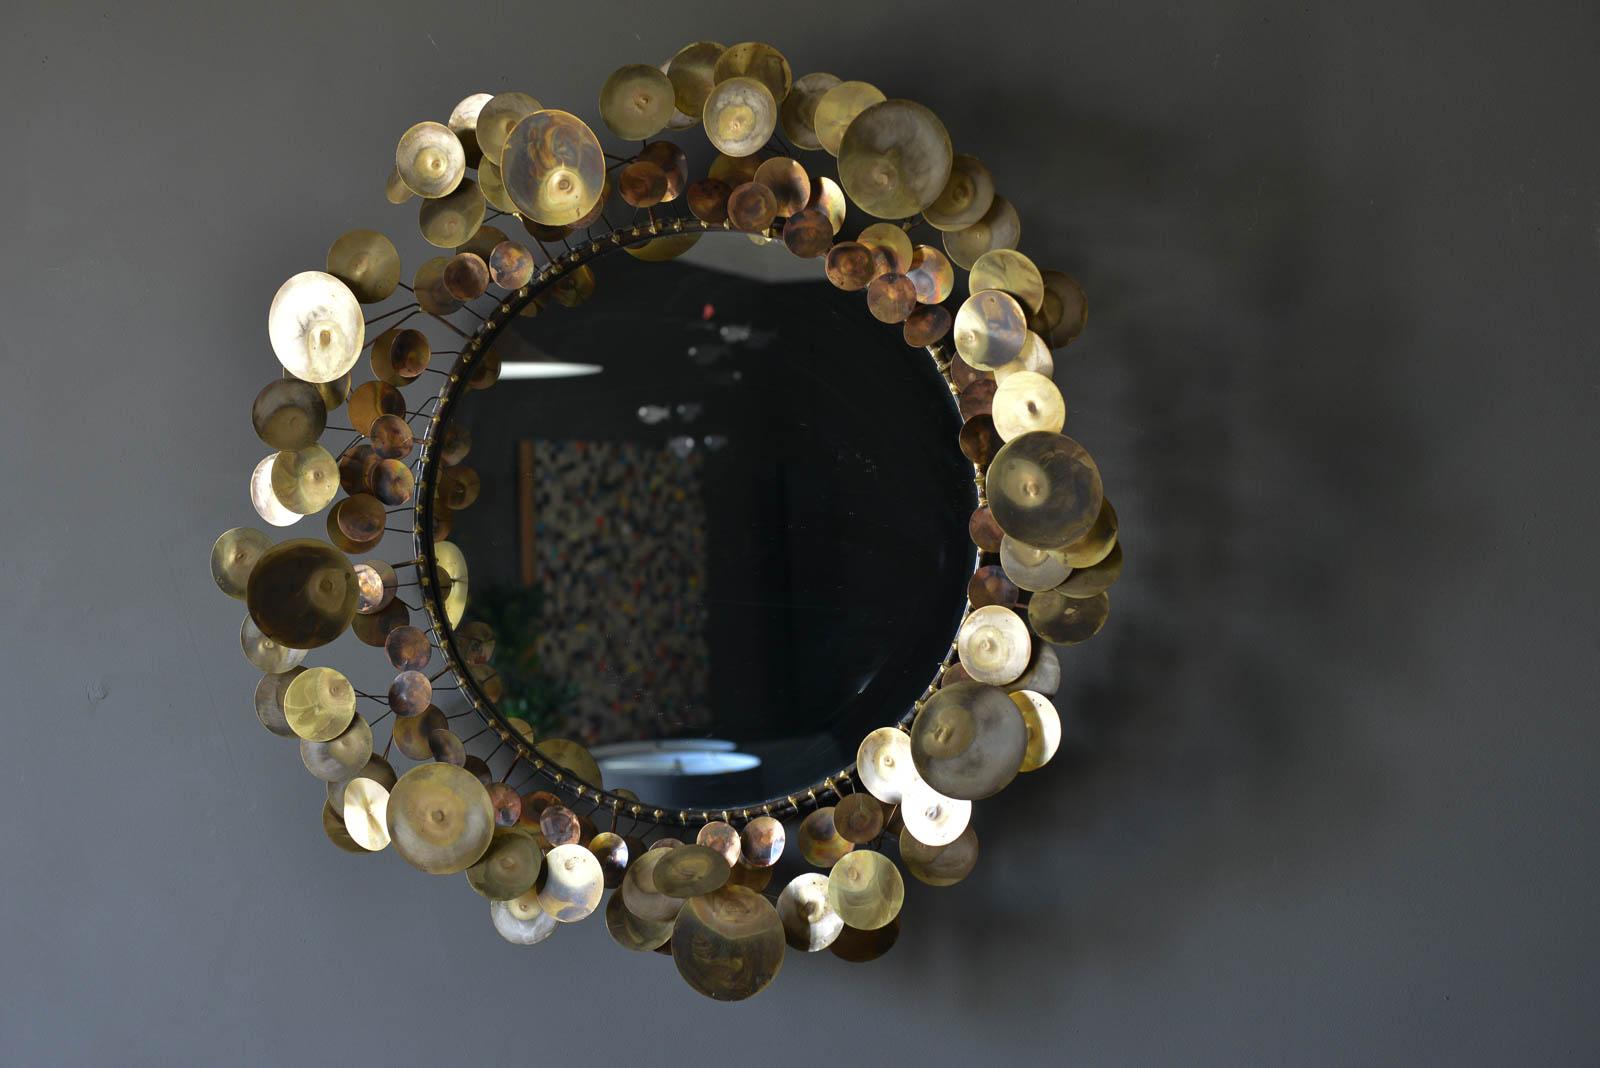 Raindrops mirror in brass by C. Jere, 1968. Original vintage piece, not a current reproduction. Beautiful condition with no cracks or chips to the mirror or missing discs. Wonderful brass patina. Ready to hang, weighs approximate 30